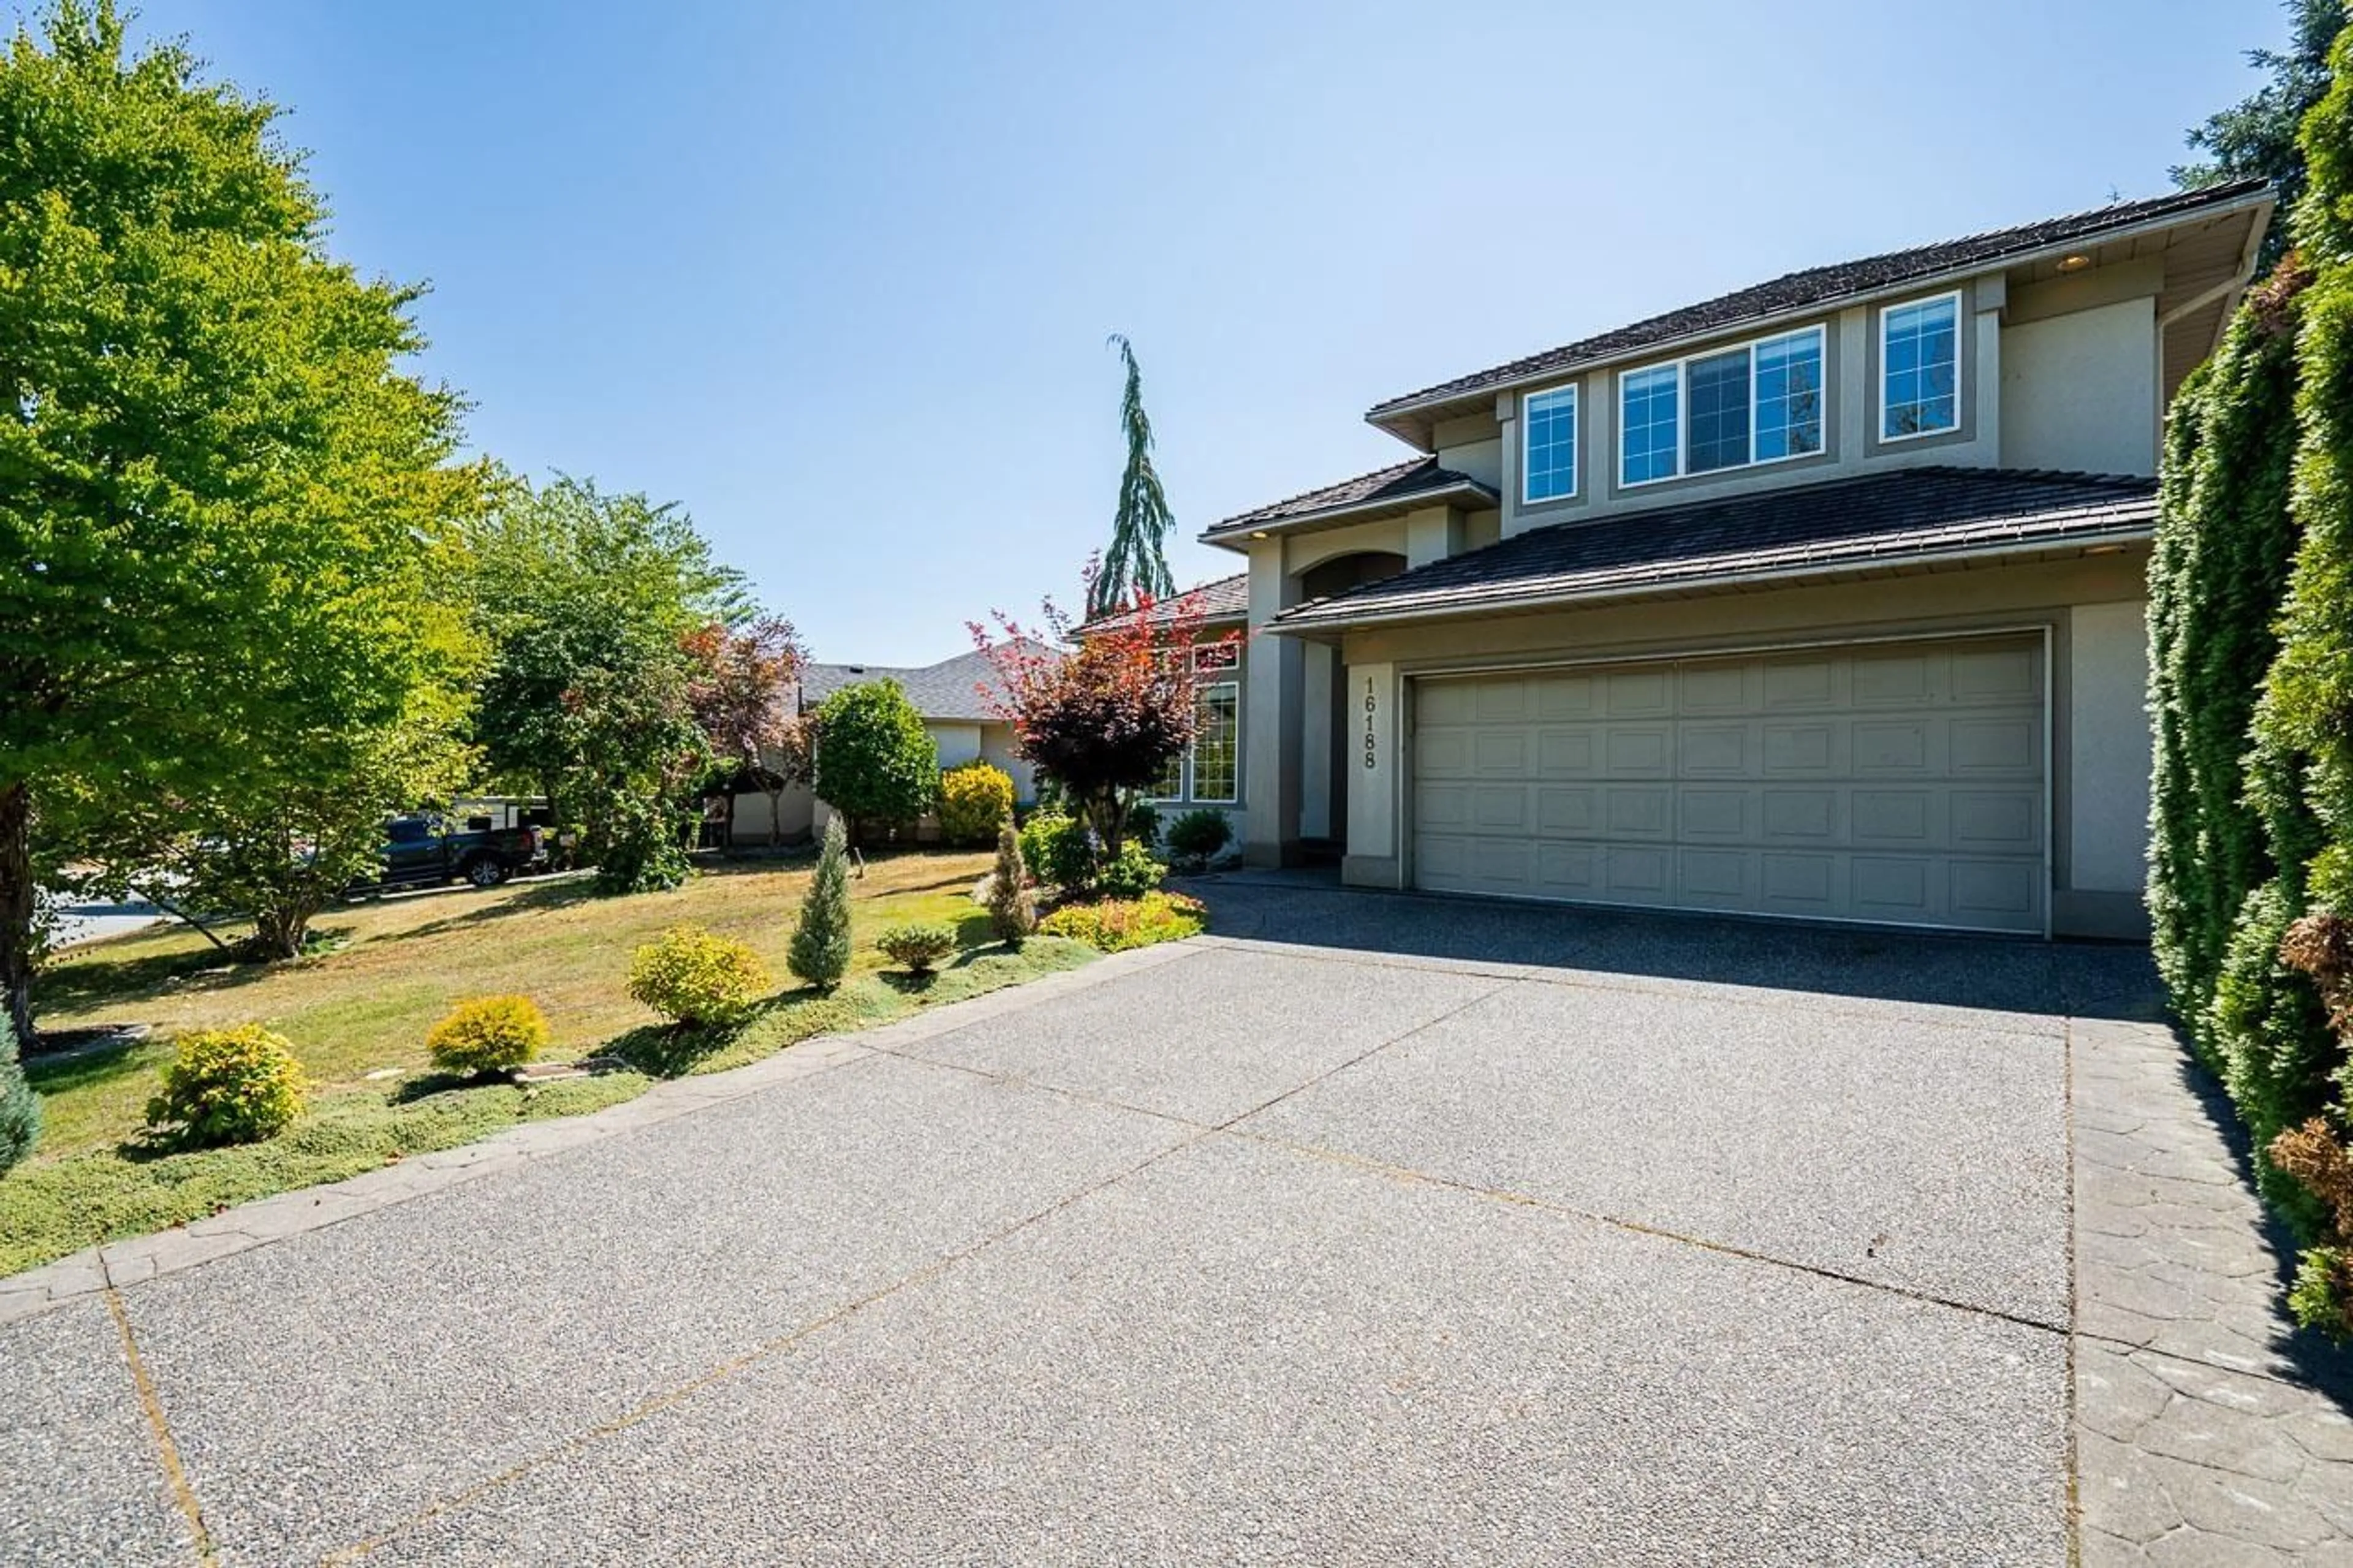 Frontside or backside of a home for 16188 111A AVENUE, Surrey British Columbia V4N4T1